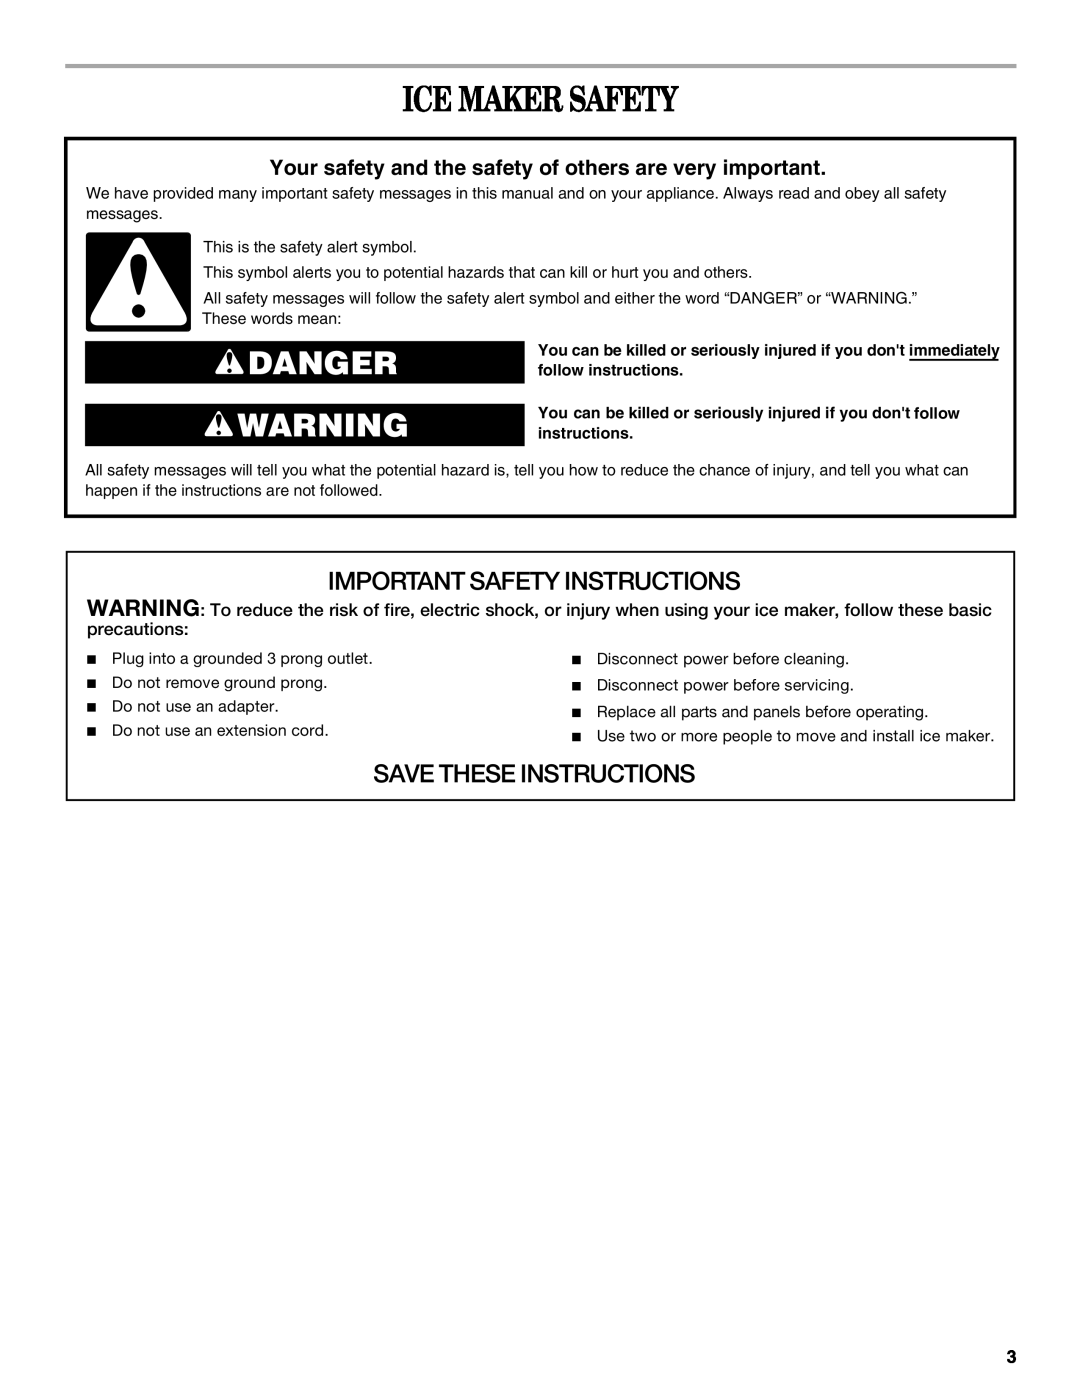 Whirlpool W10206421B manual Ice Maker Safety, Danger, Important Safety Instructions, Save These Instructions, precautions 